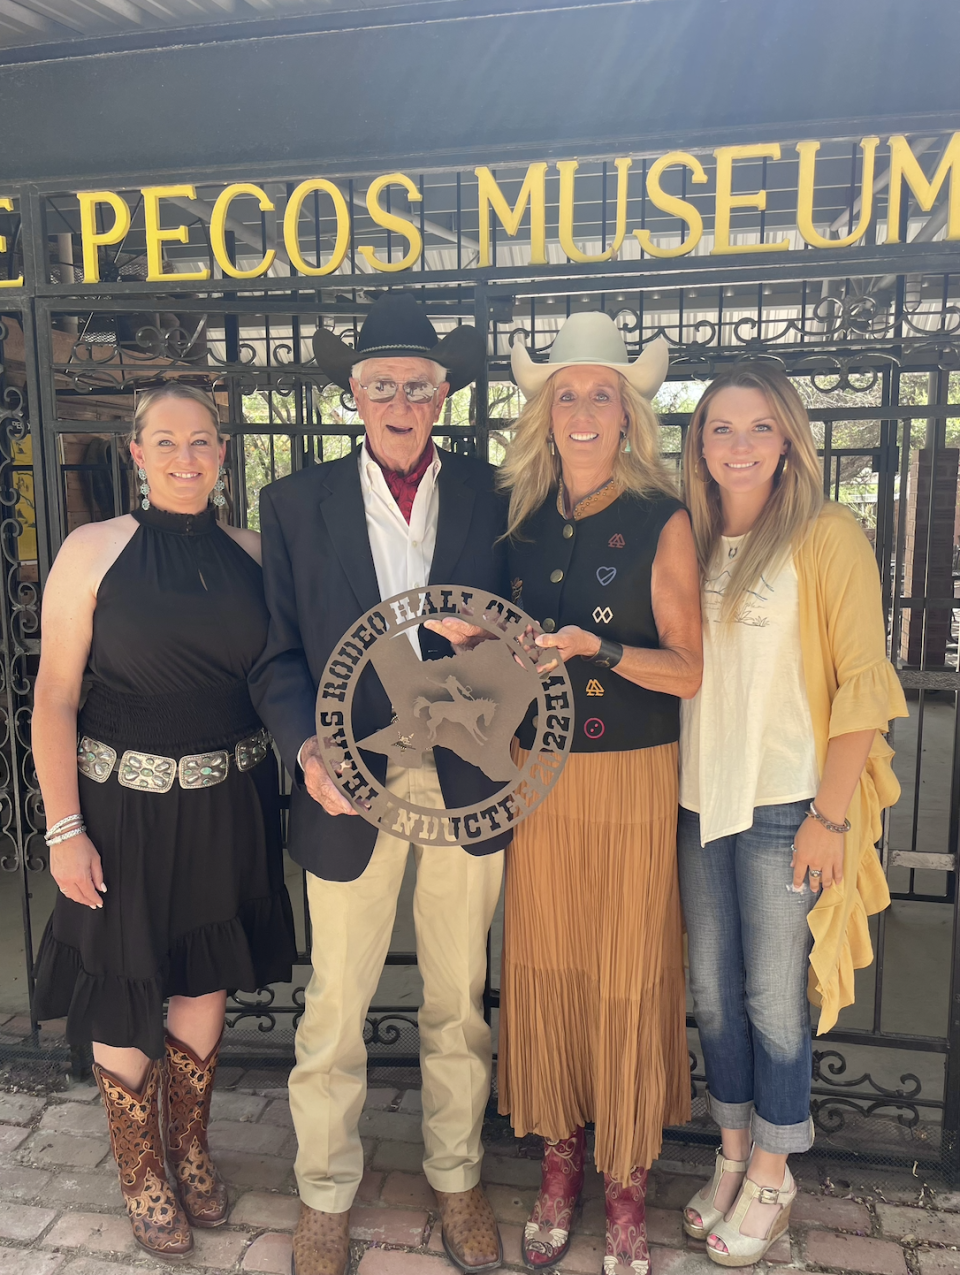 Angela Ganter (second from right) poses after being inducted into the Texas Rodeo Hall of Fame on June 24 in Pecos.